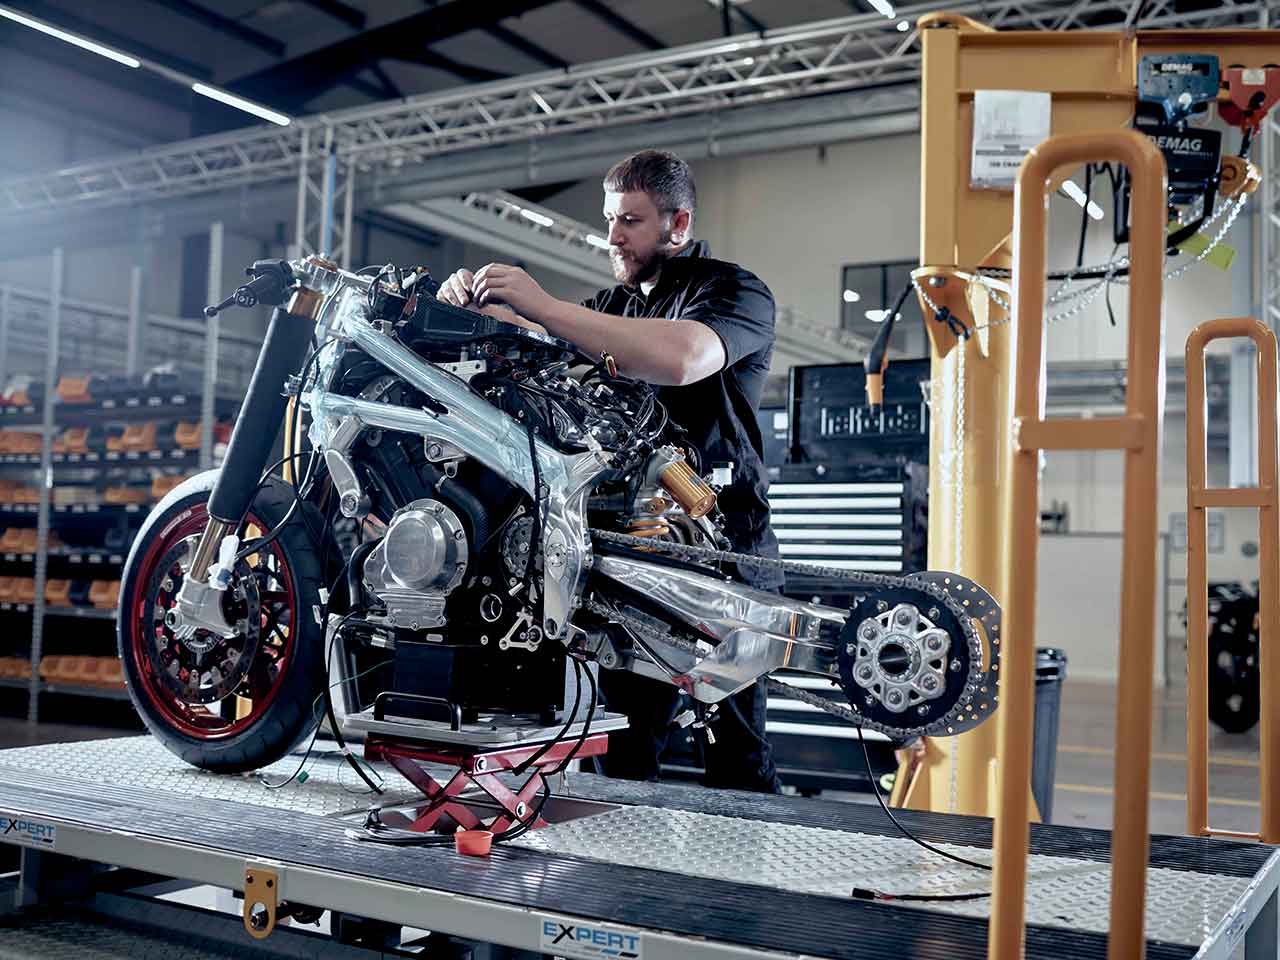 Norton Motor cycles employee working on a motorcycle.